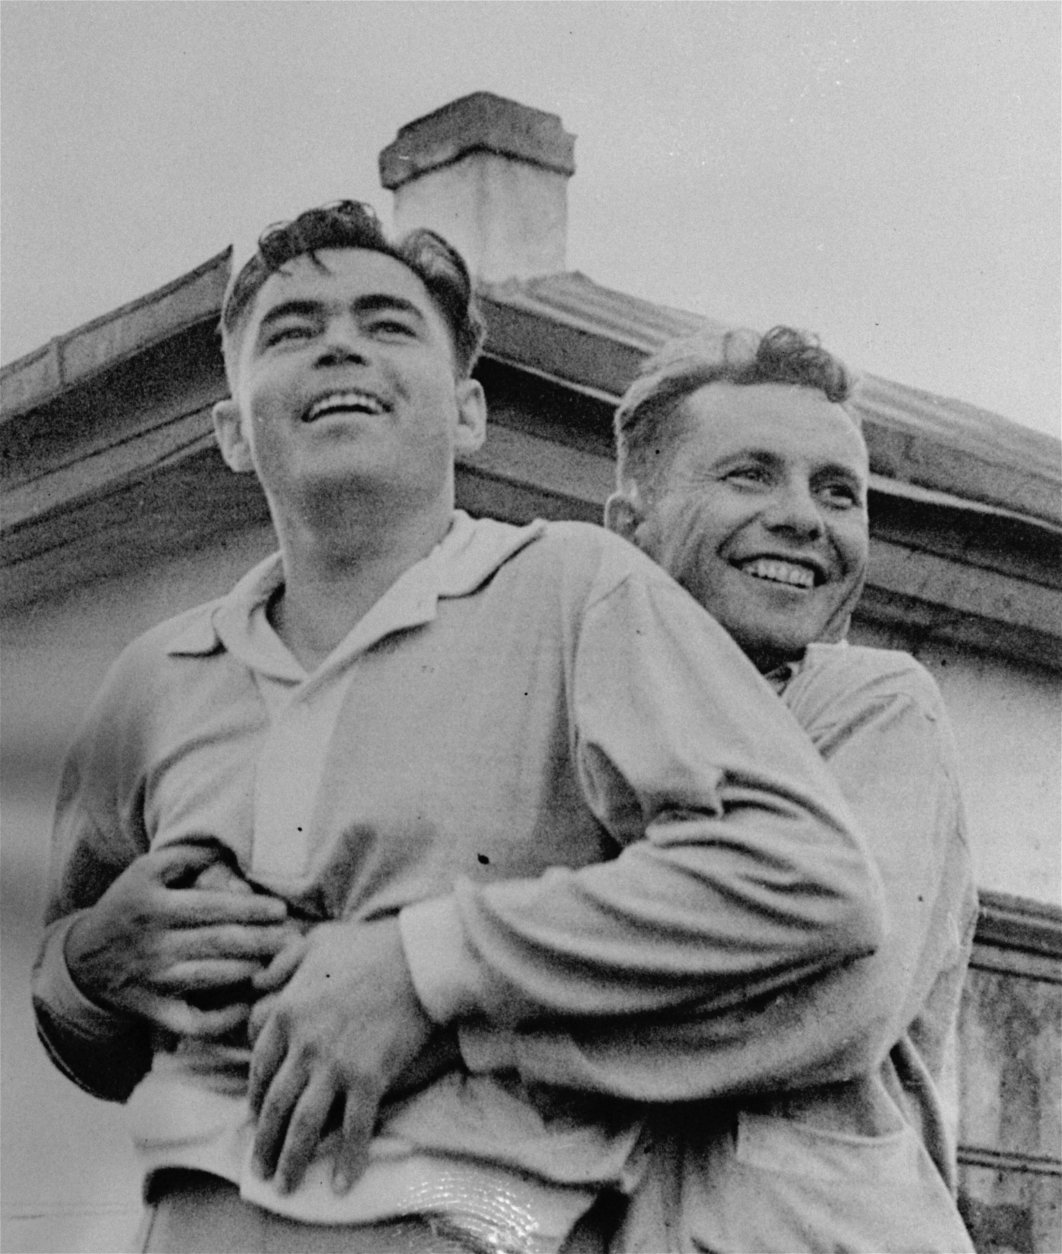 FILE -  this is an in Aug. 1962 file photo of Soviet Cosmonauts Andrian Nikolayev, left, and Pavel Popovich seen after landing their space ships in Russia following record dual orbital flight in Aug. 1962. Pavel Popovich, the sixth man to go into orbit, has died at age 78 on Wednesday, Sept. 30, 2009 of a stroke in Gurzuf, a resort city on Ukraine's Crimean Peninsula. (AP Photo/ ITAR-TASS, File)